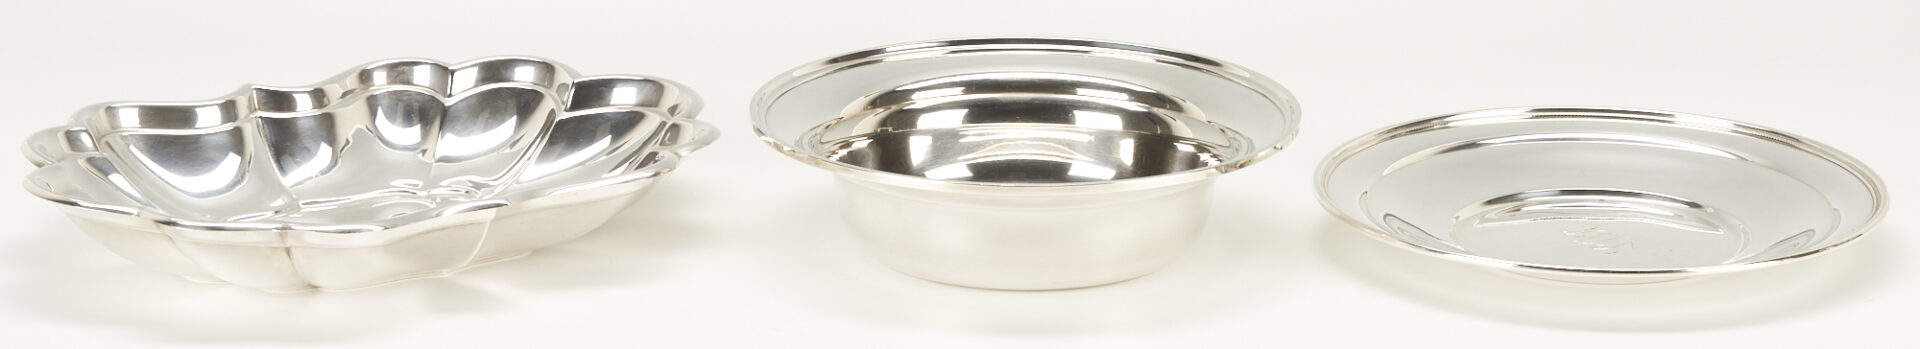 Lot 788: 3 Pcs. Sterling Silver Holloware, incl. Reed & Barton Tray & S. Kirk & Son Bowl & Underplate